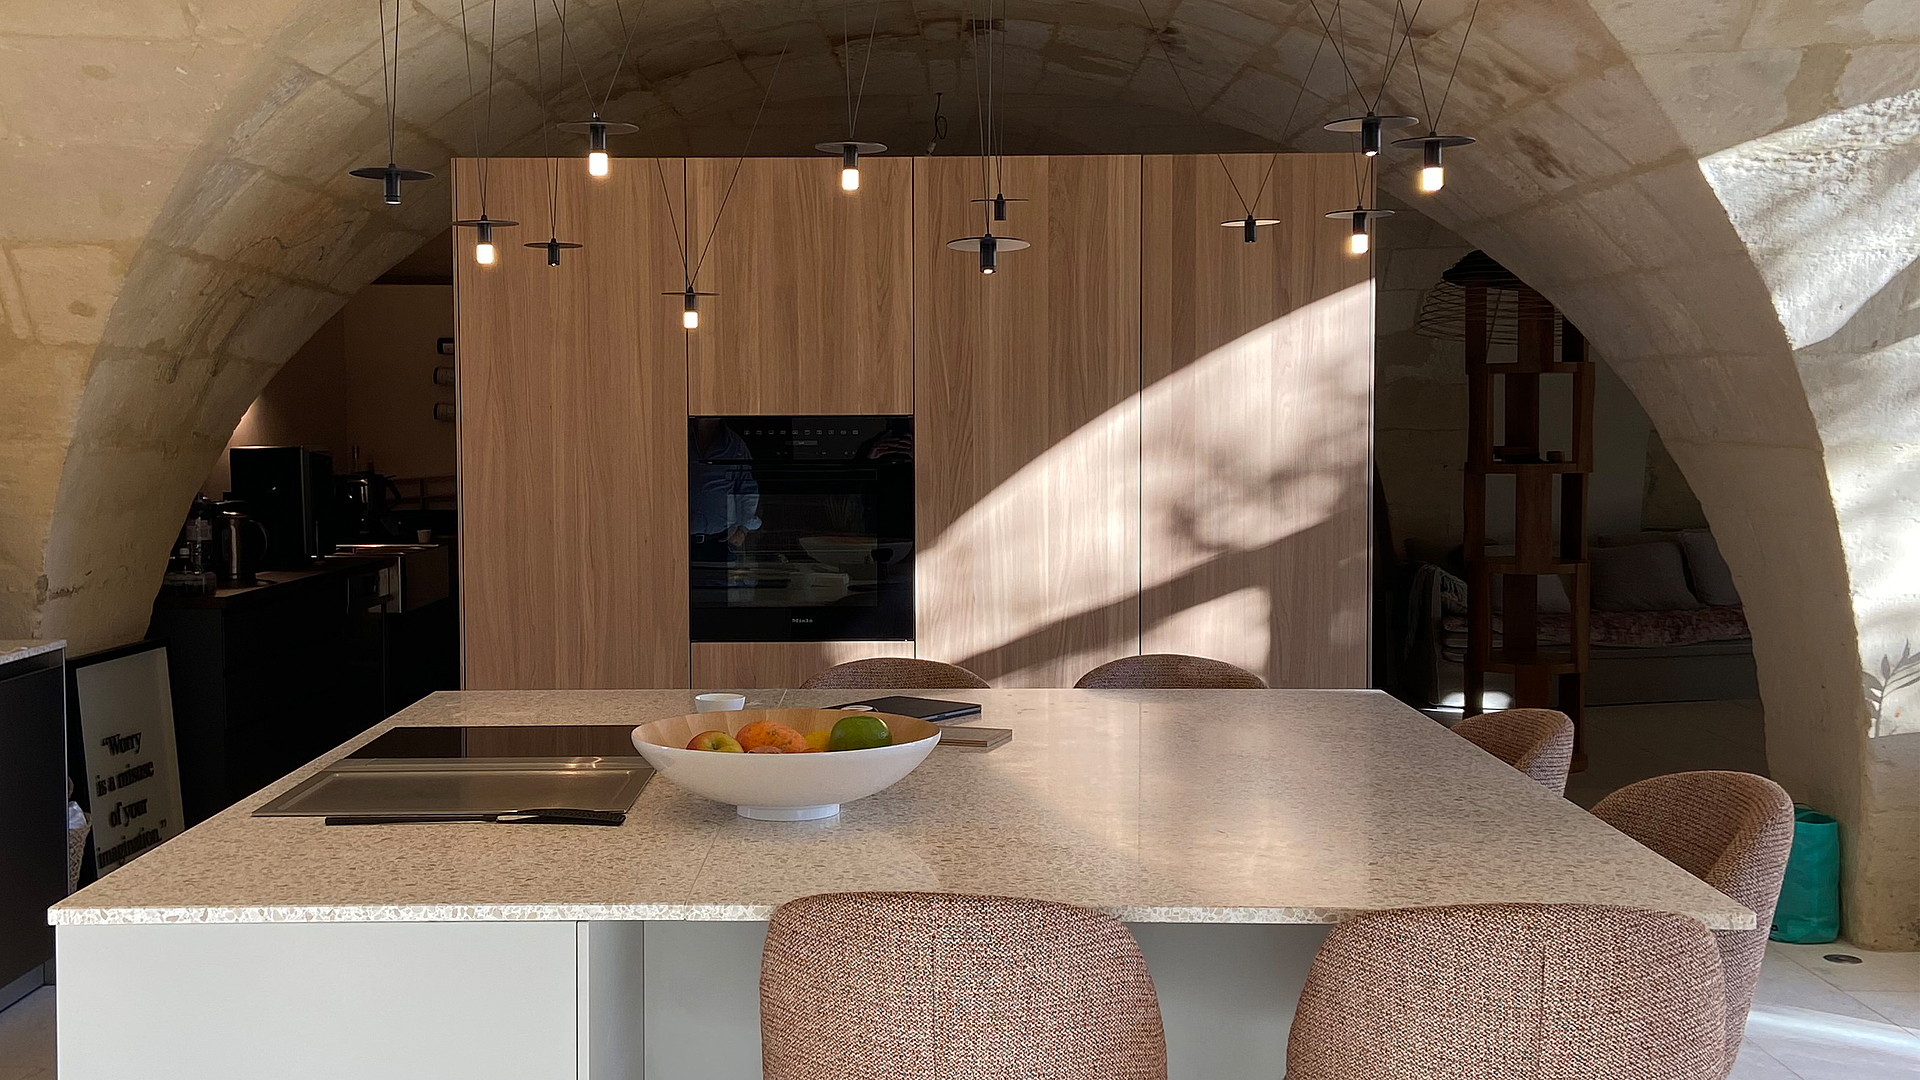 A dream kitchen in a vaulted stable